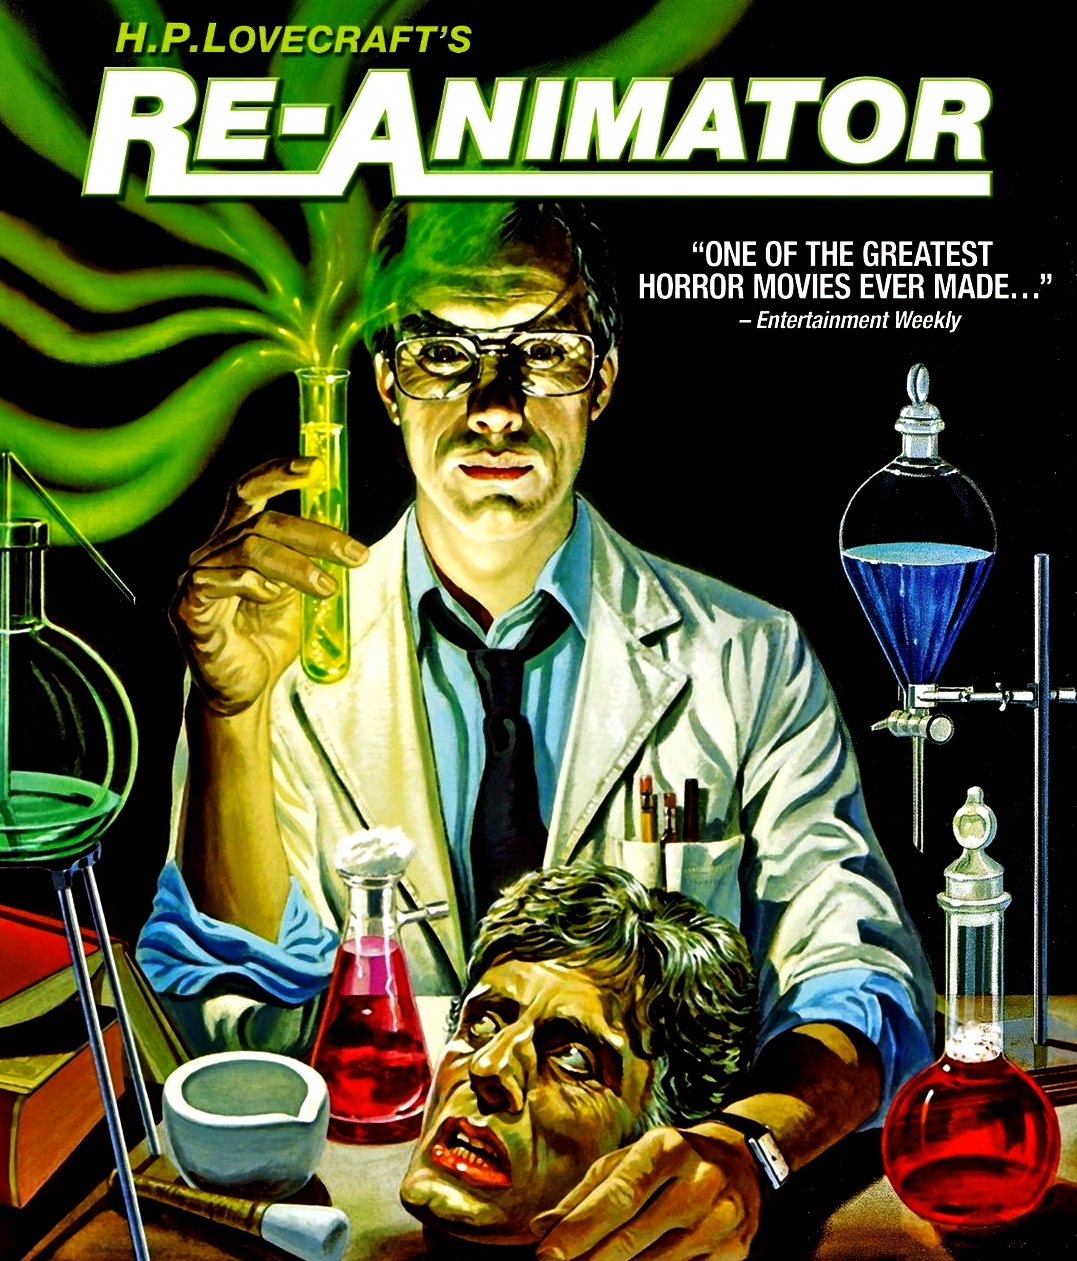 Re-Animator -A dedicated student at a medical college and his girlfriend become involved in bizarre experiments centering around the re-animation of dead tissue when an odd new student arrives on campus.